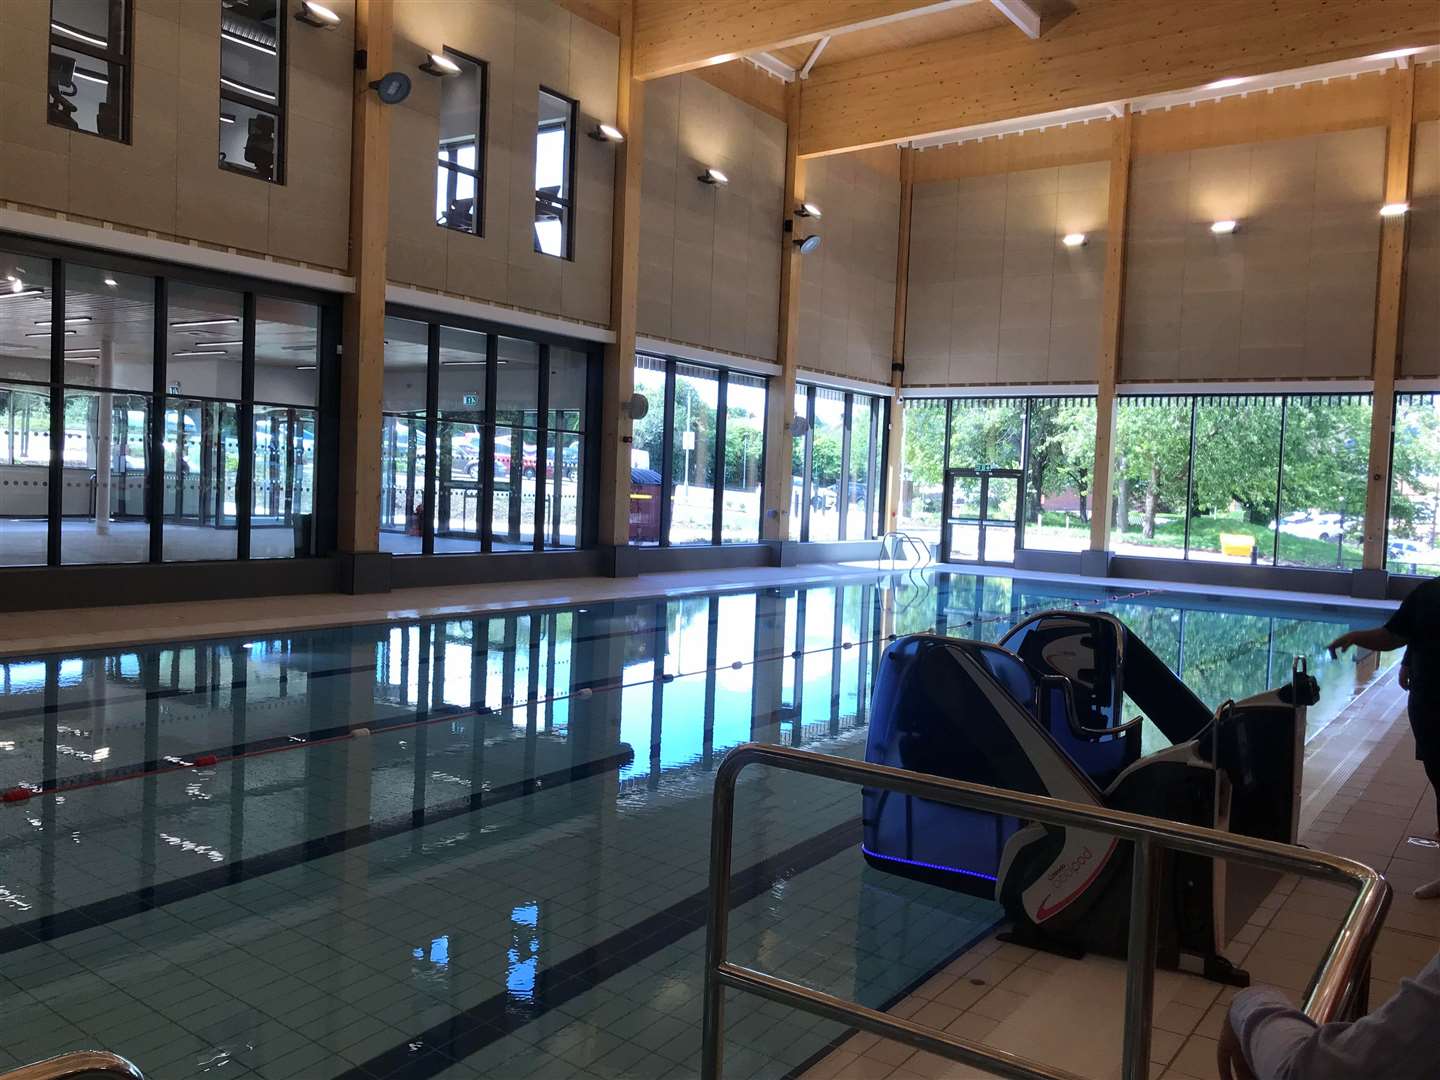 The pools have two lifts for wheelchair users to enter the water